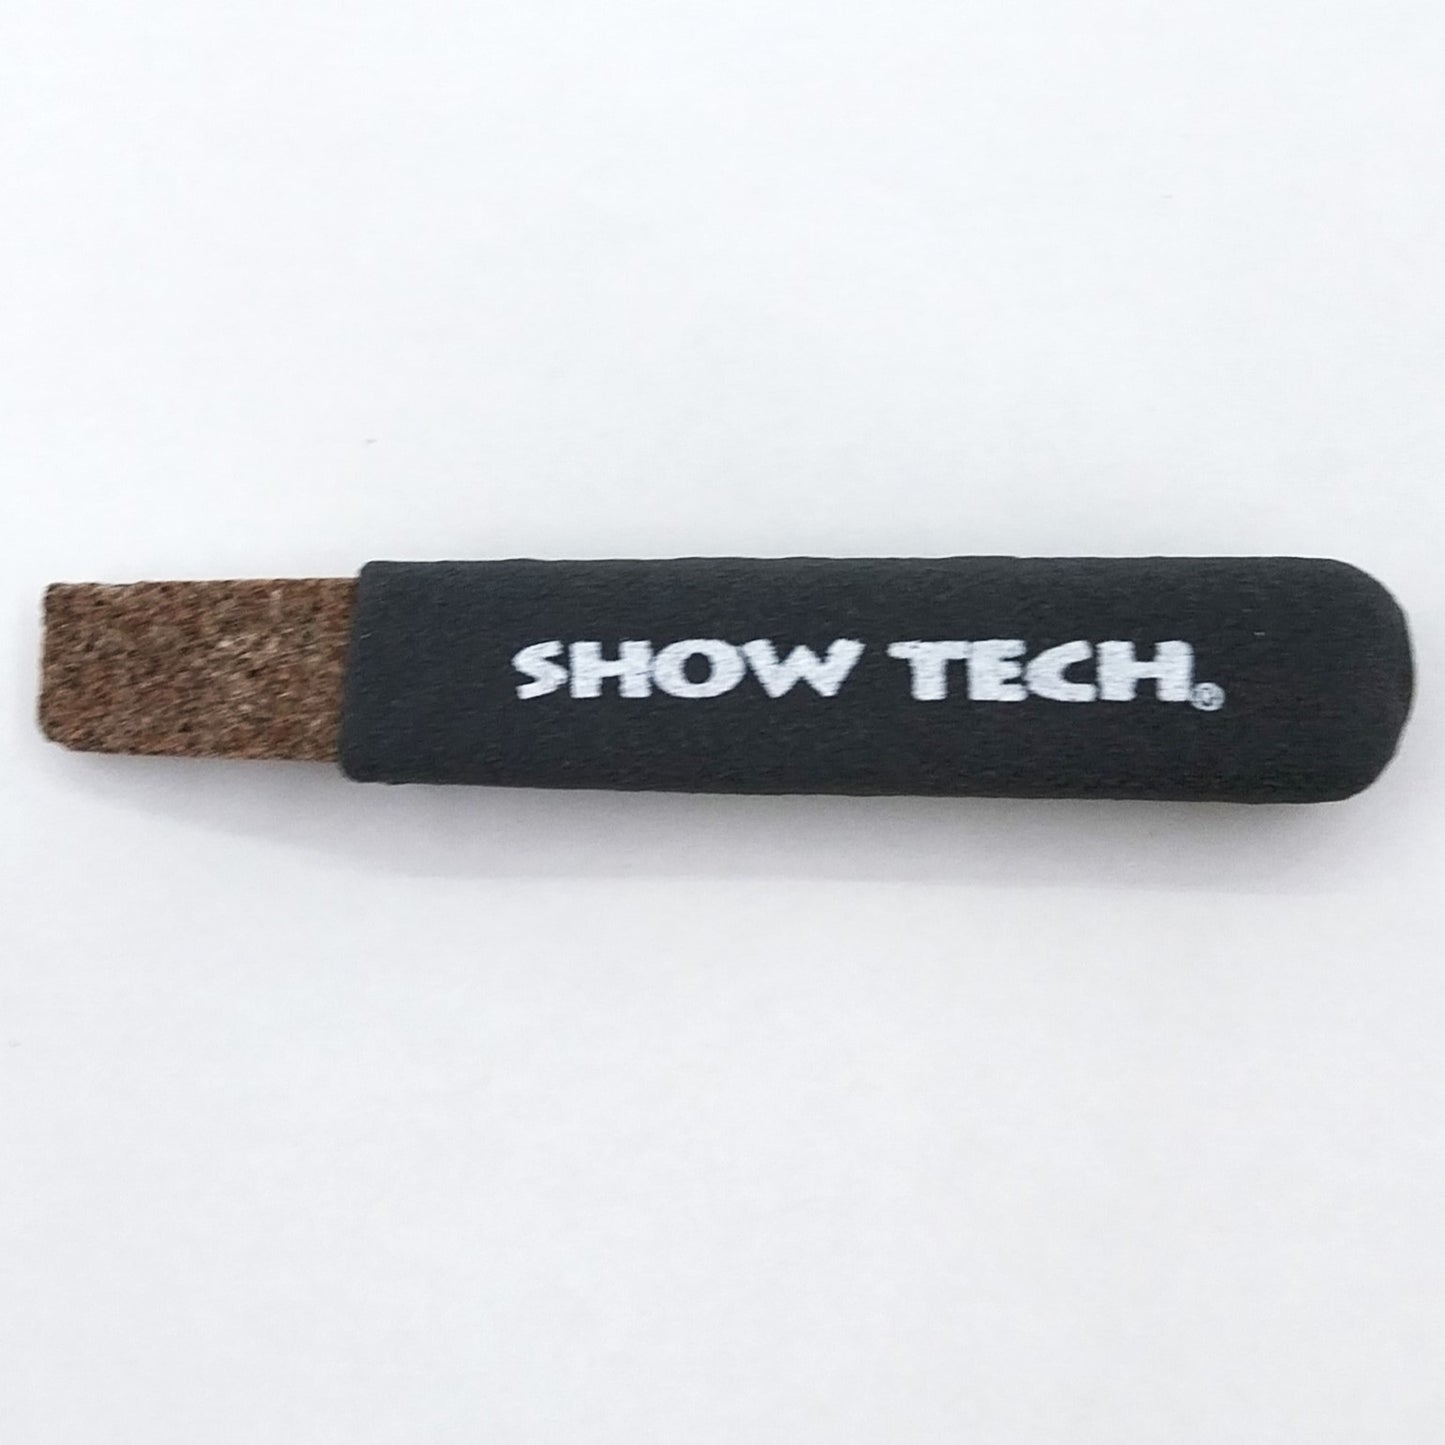 Show Tech Comfy Stripping Stick 8mm, Comfy Stripping Stick Stone 13mm